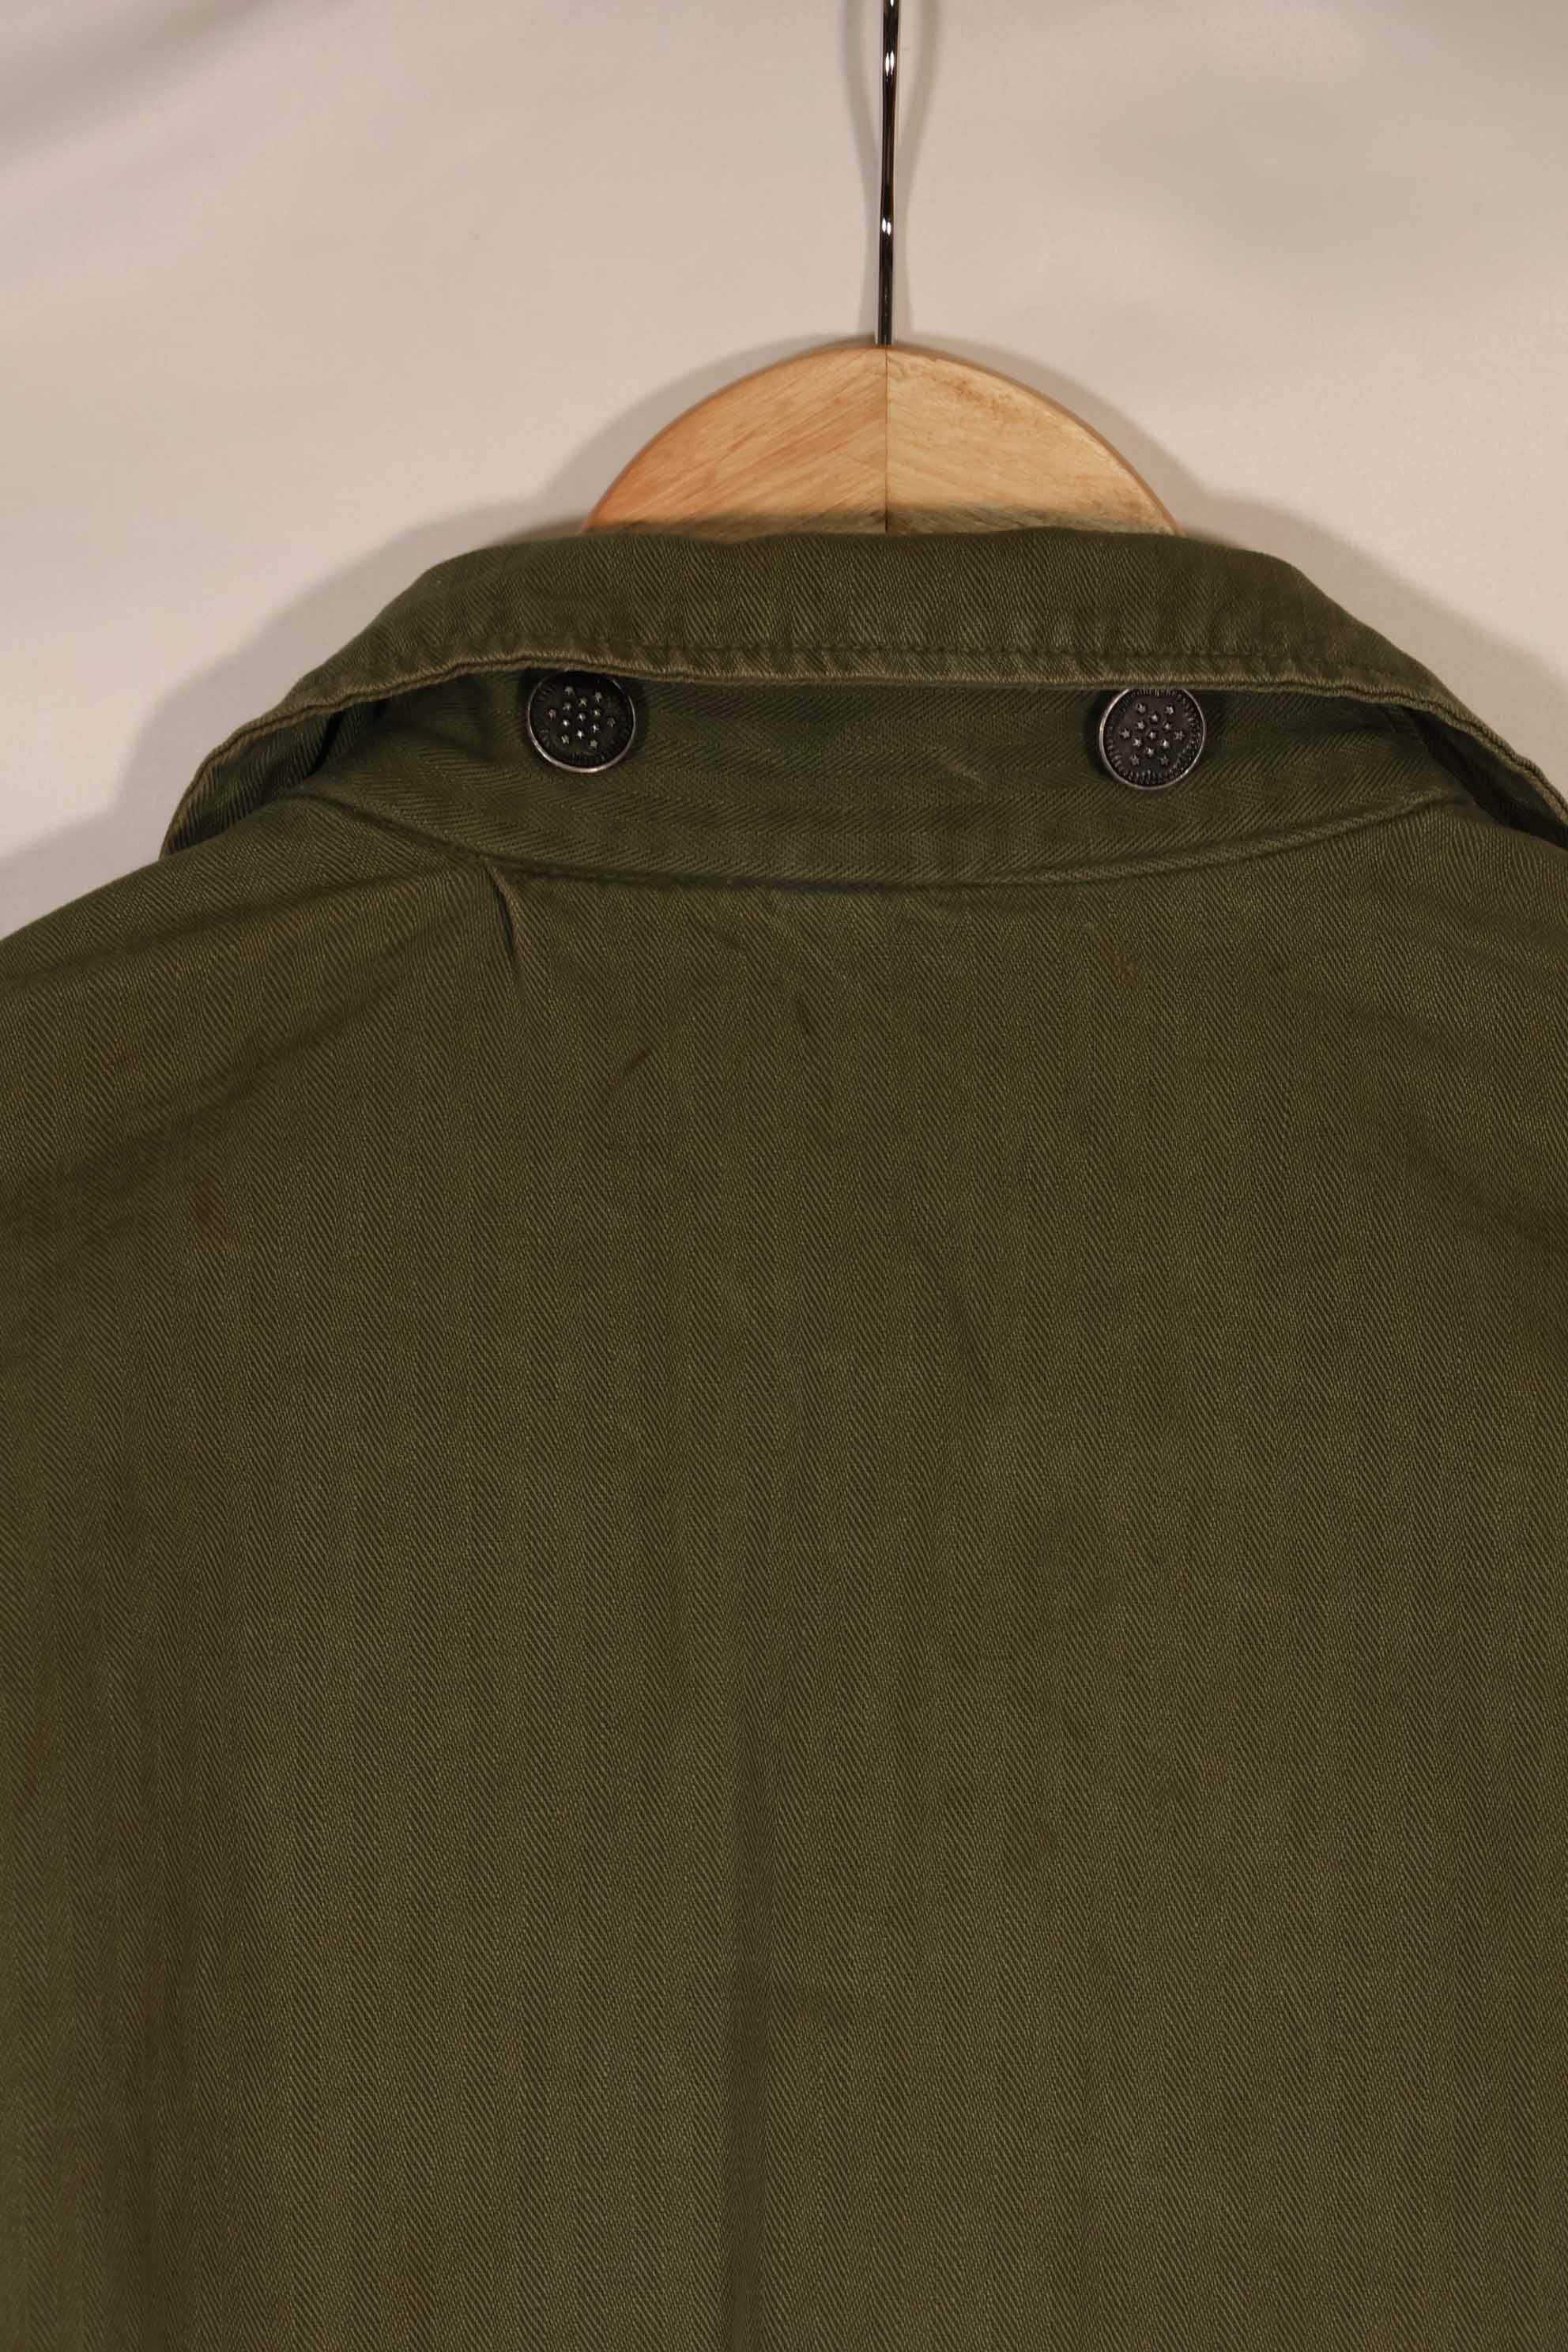 Real 1940s US Army HBT OD Utility Jacket Used 36R